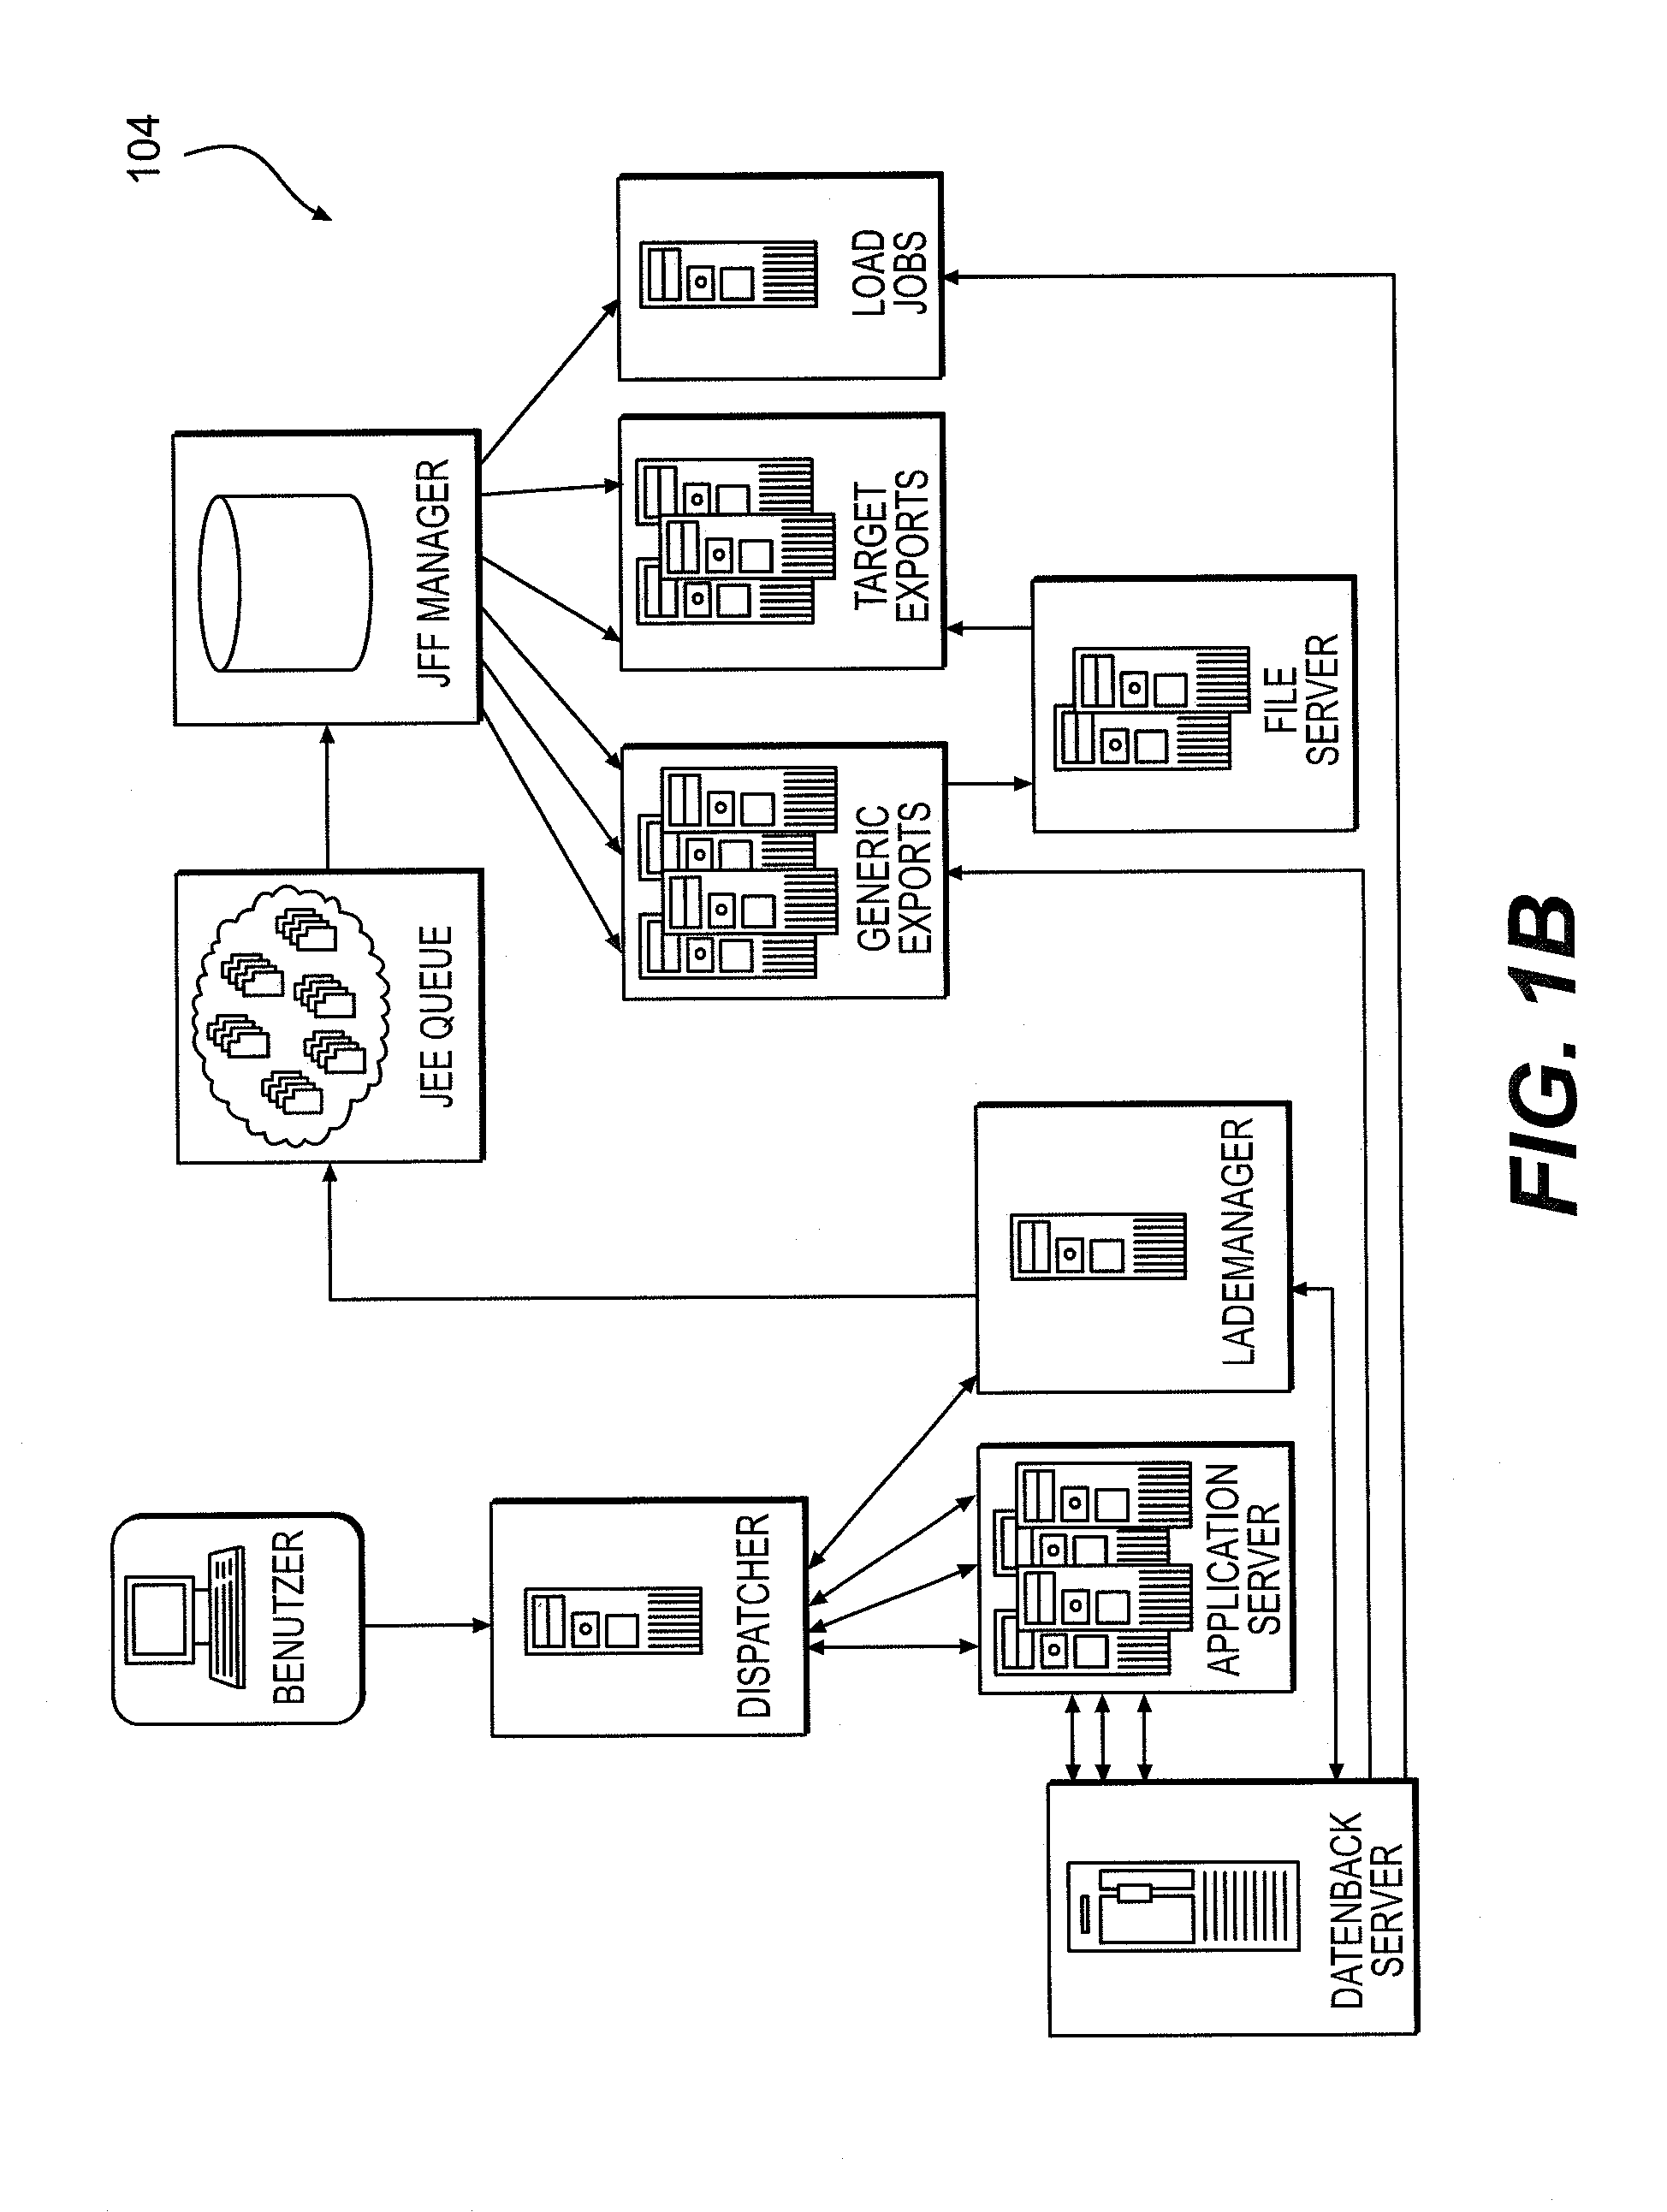 Network centric system and method to enable tracking of consumer behavior and activity